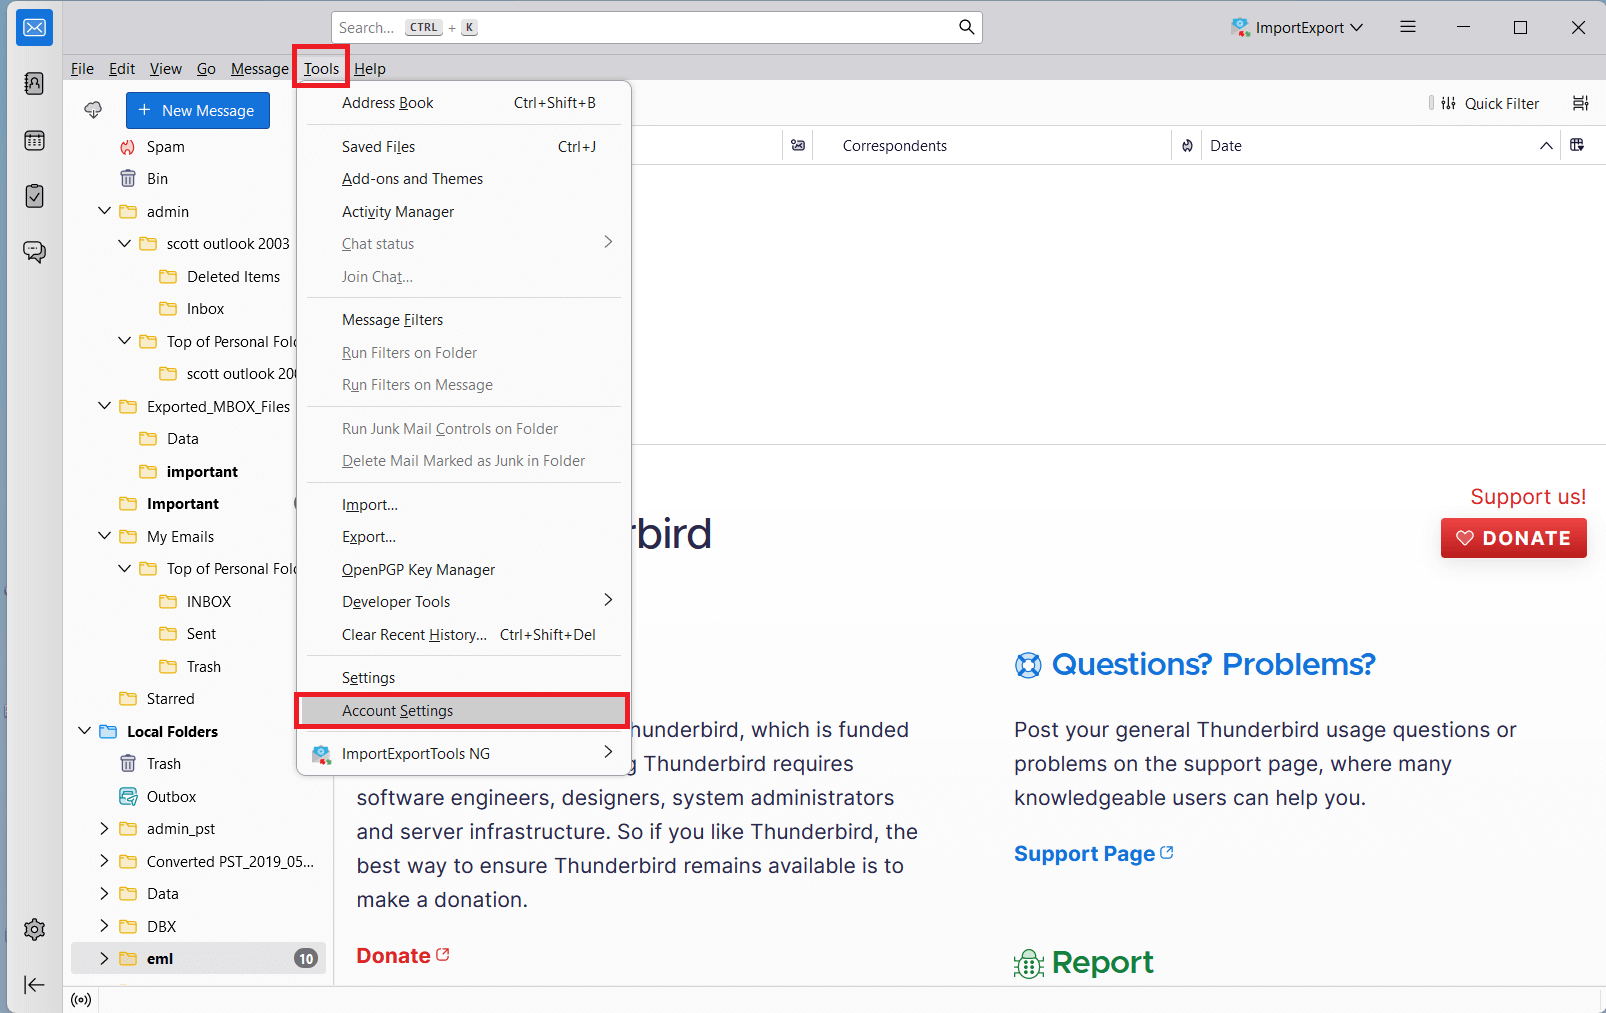 click on Tools and account settings